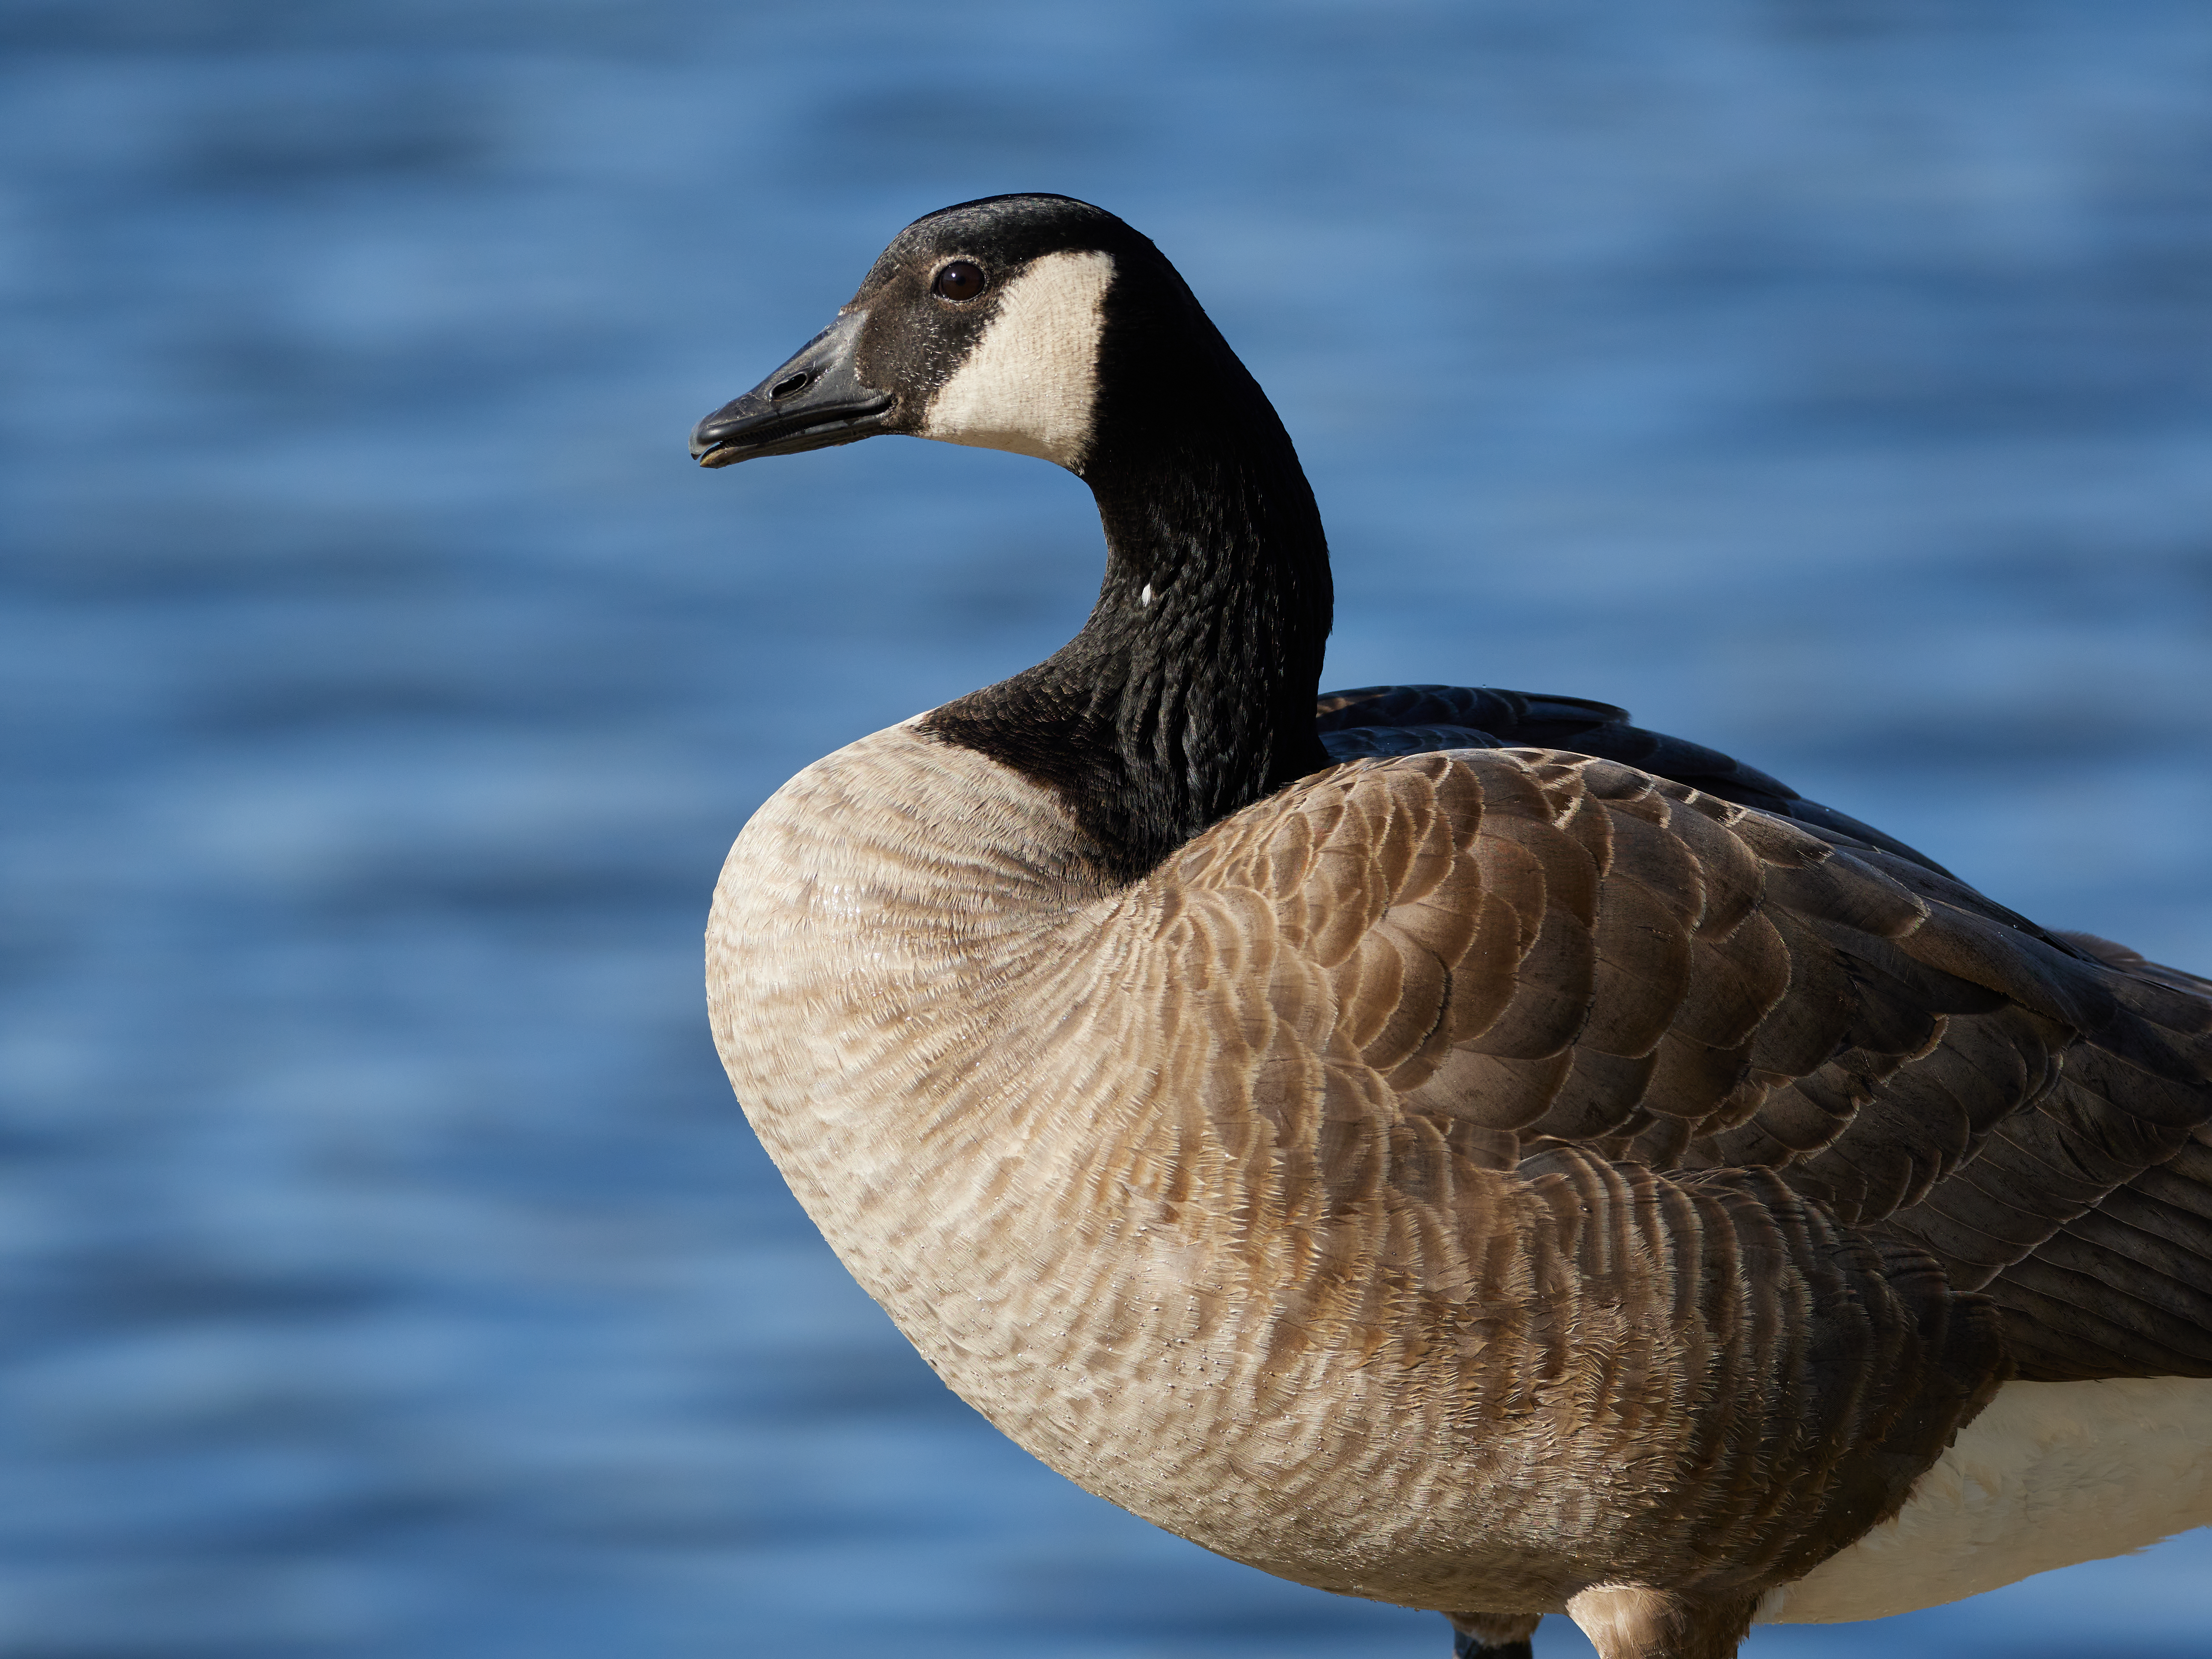 On the one hand, geese are boring. On the other hand, this goose is SHARP